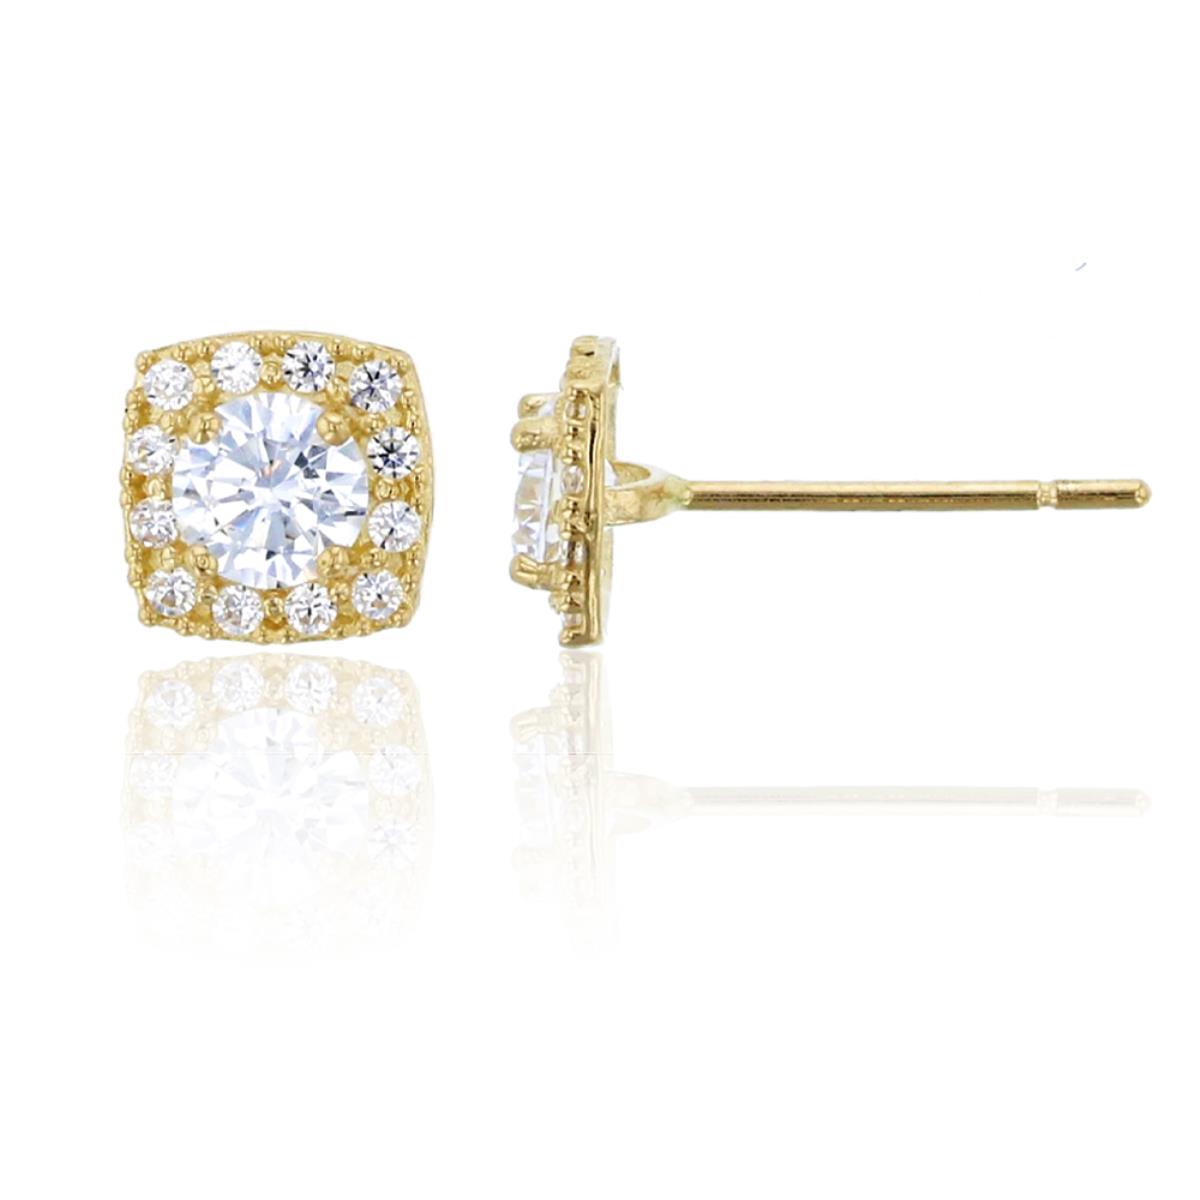 14K Yellow Gold 3.75mm Round Cut Square Shapped Halo Stud Earring